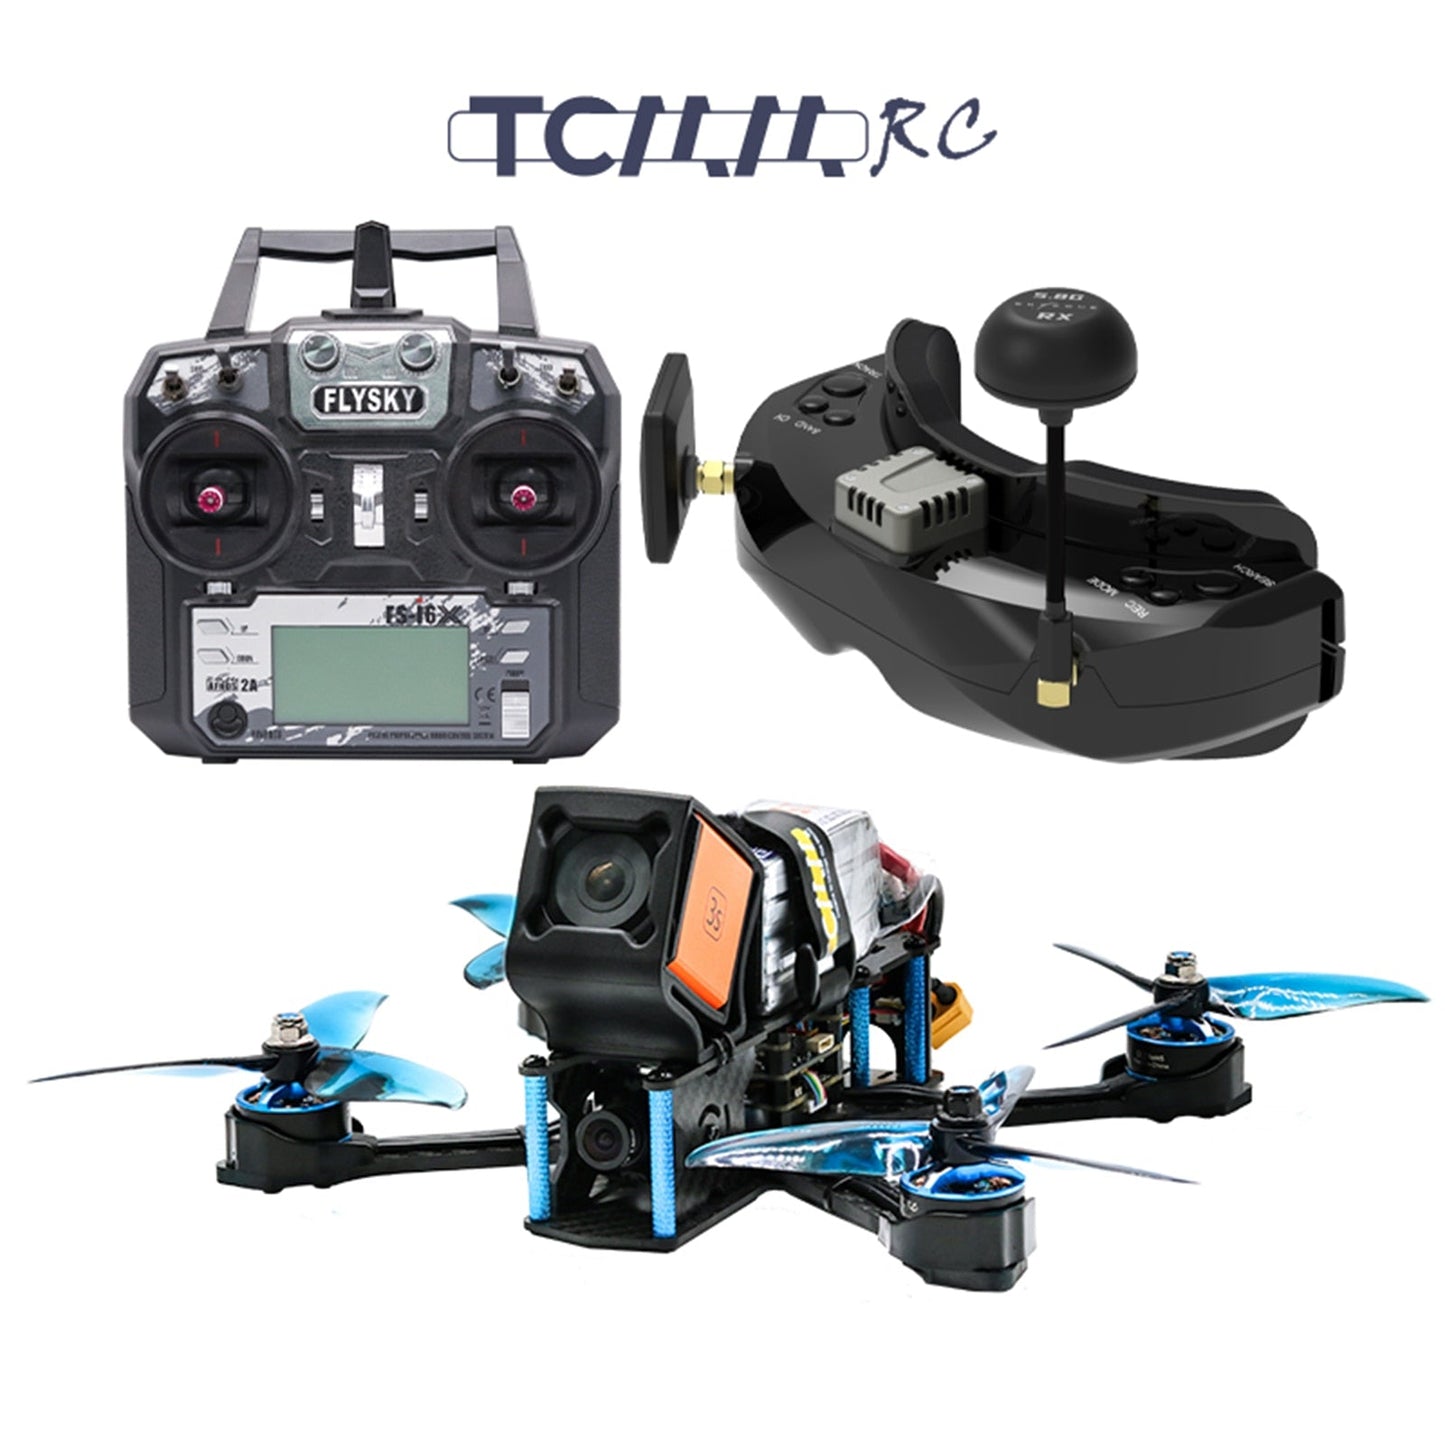 TCMMRC Entry-Level BULLY Drone Package with Remote Control and FPV Glasses Toyland EU Toyland EU